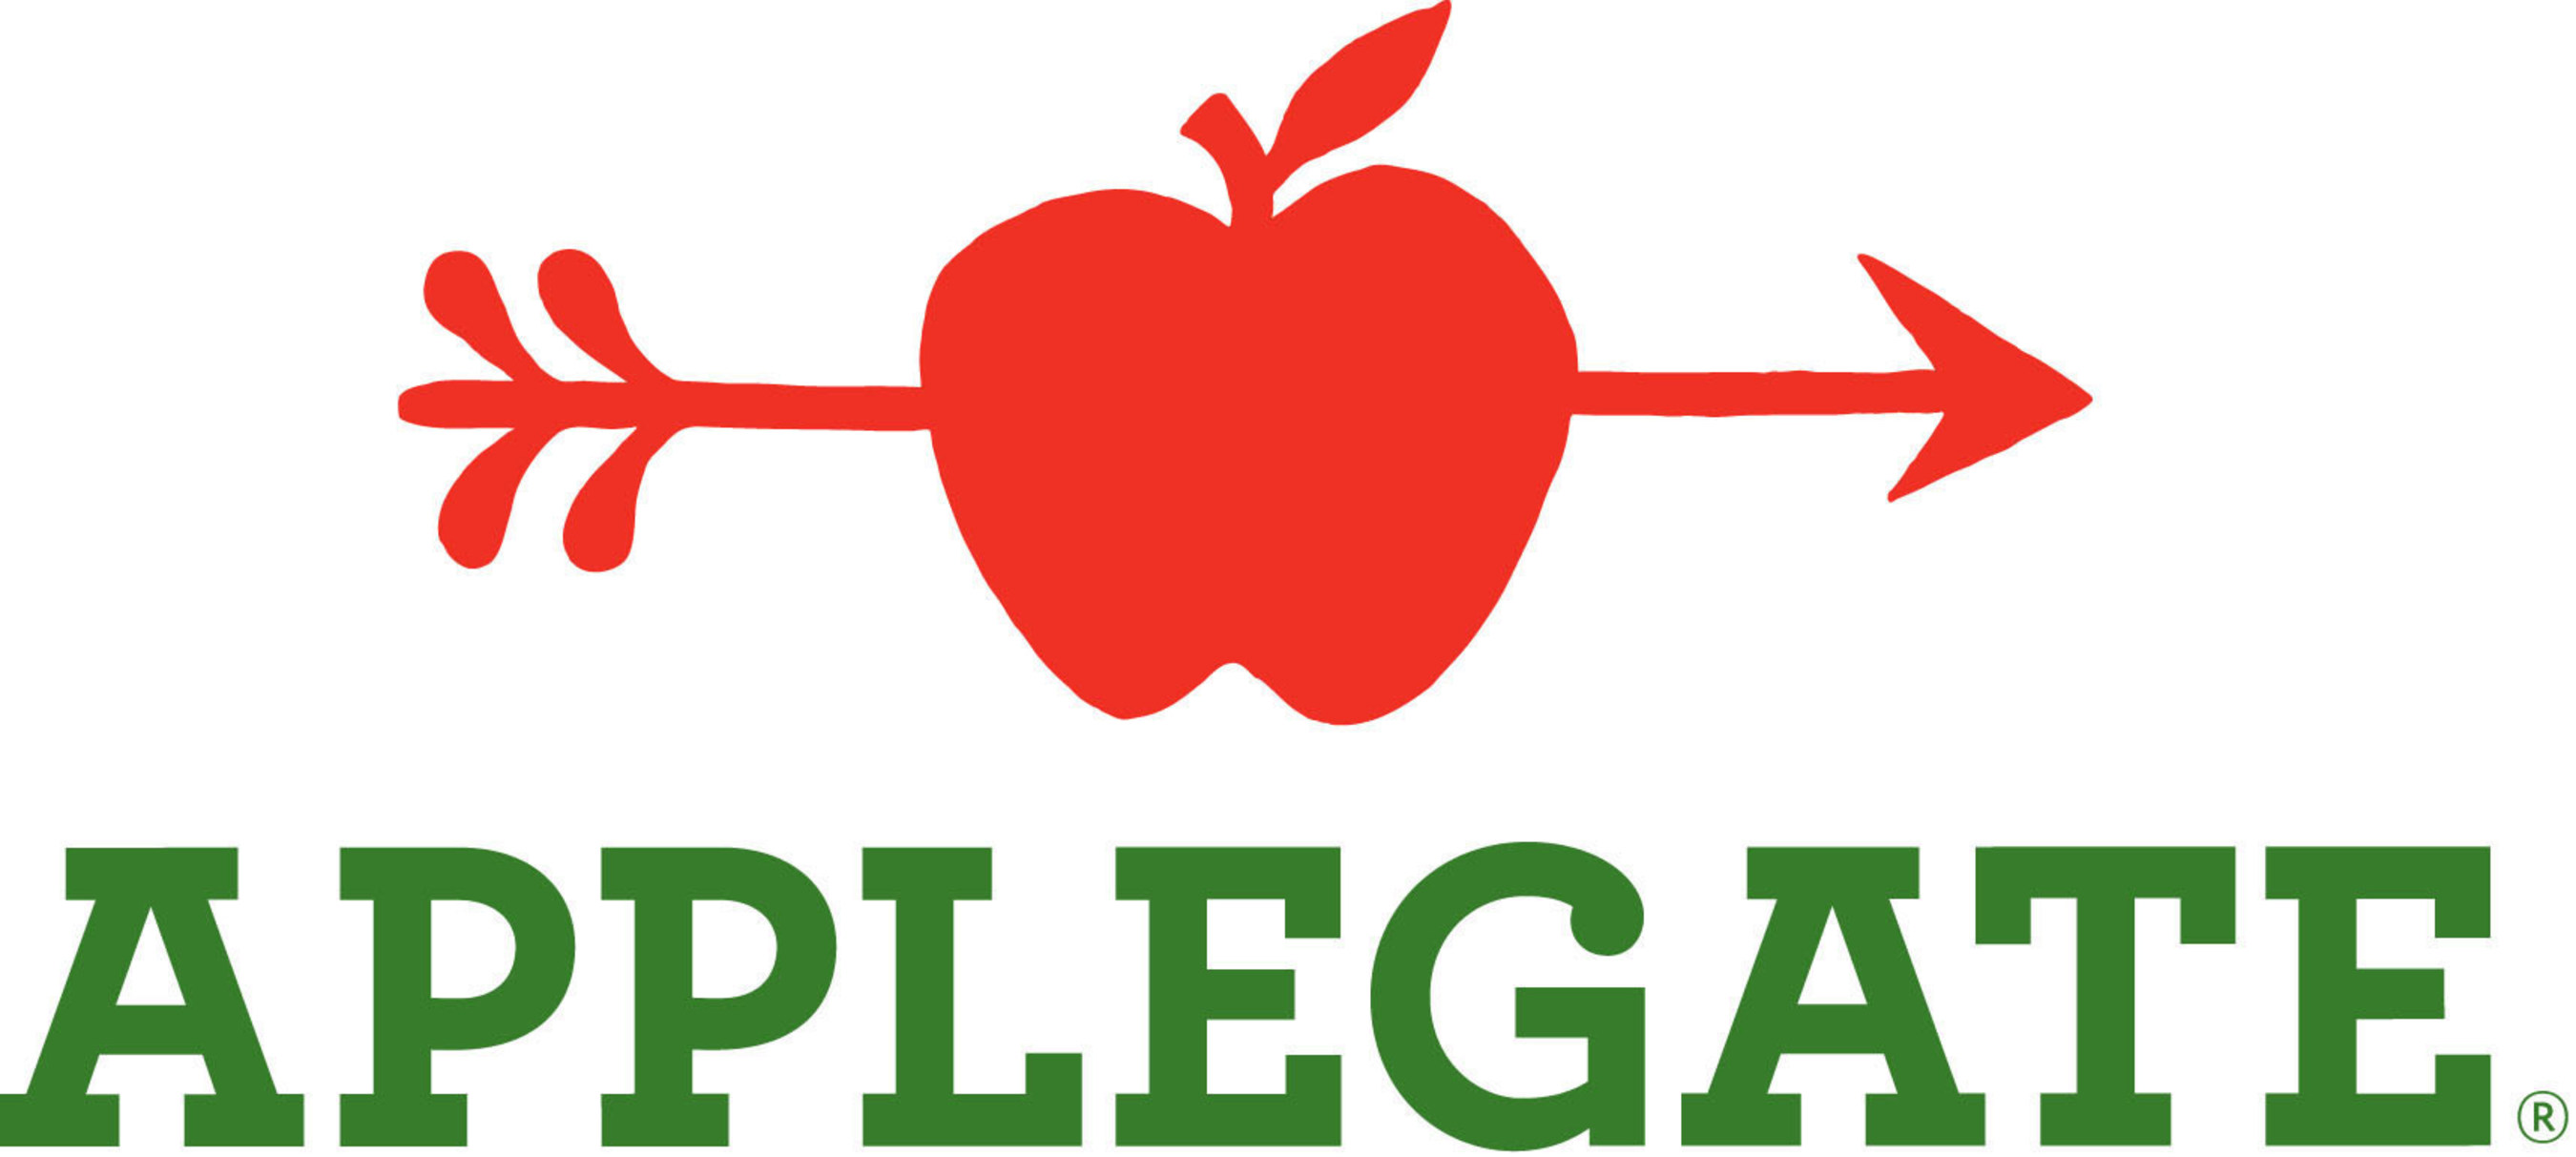 Applegate is the country's leading producer of natural and organic meats.